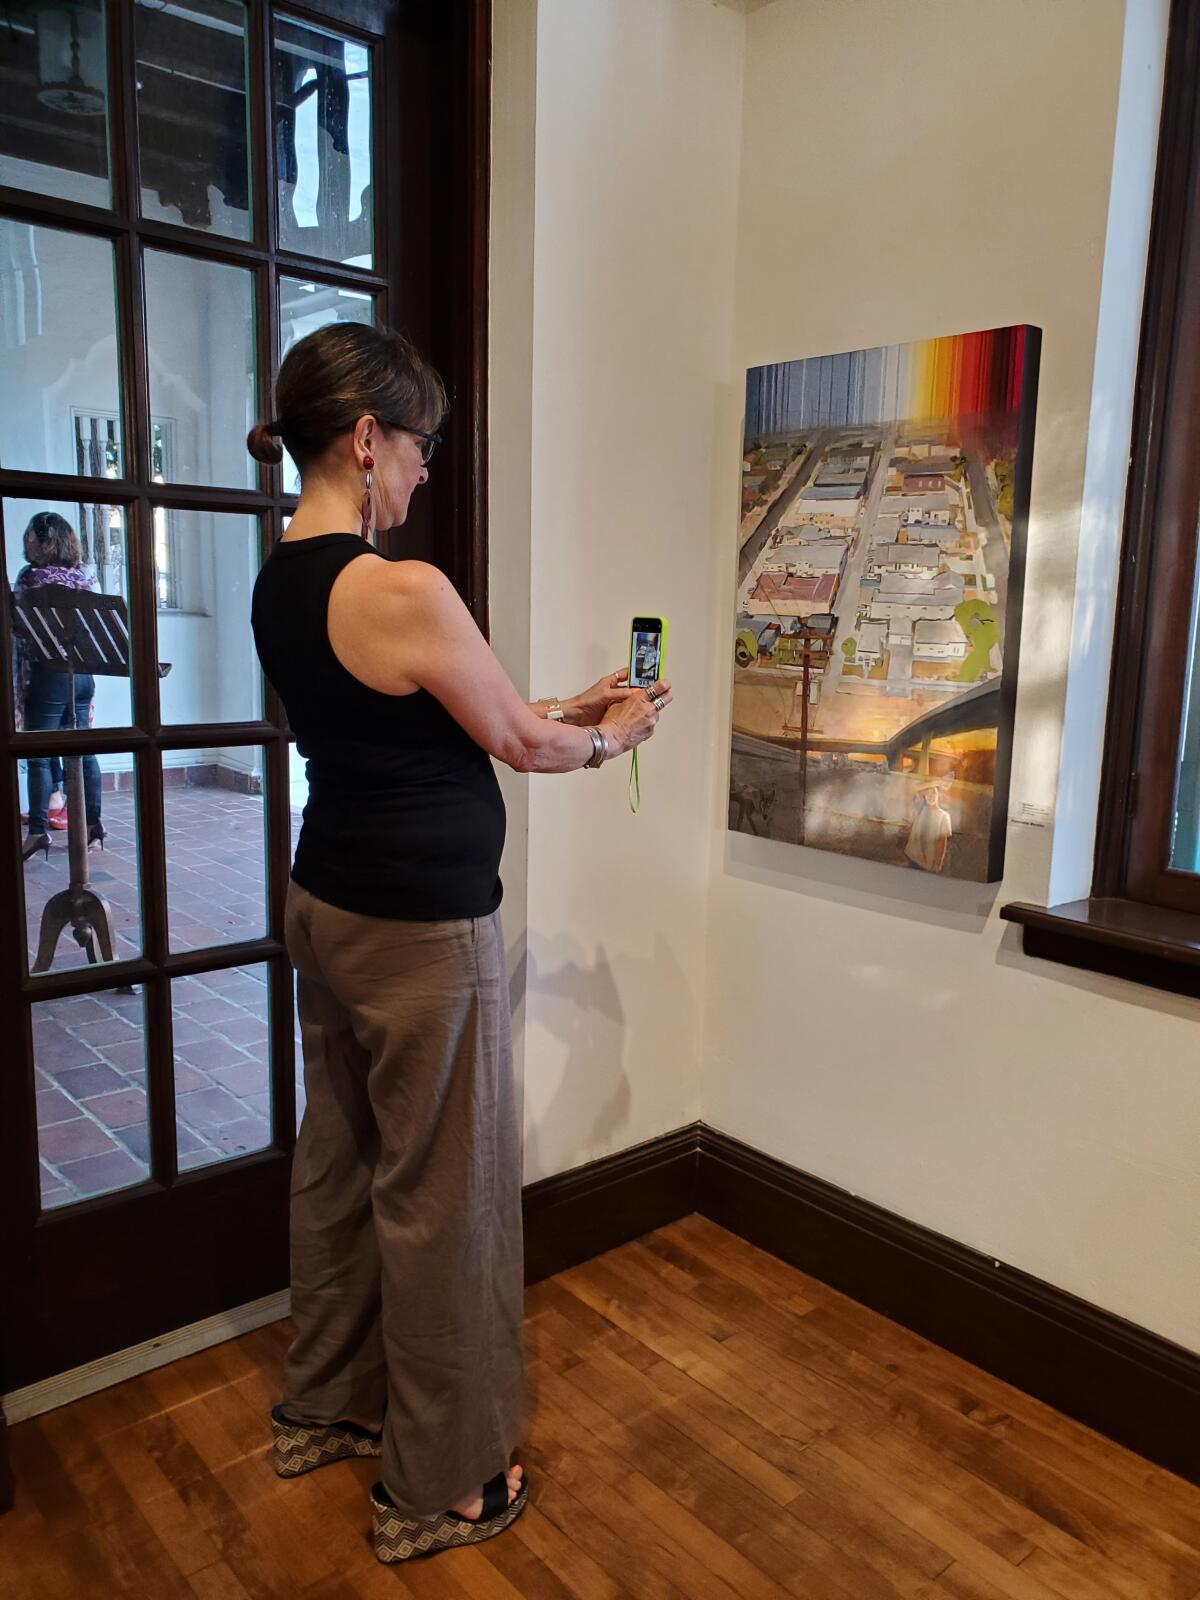 The Athenaeum Music & Arts Library's annual Juried Exhibition